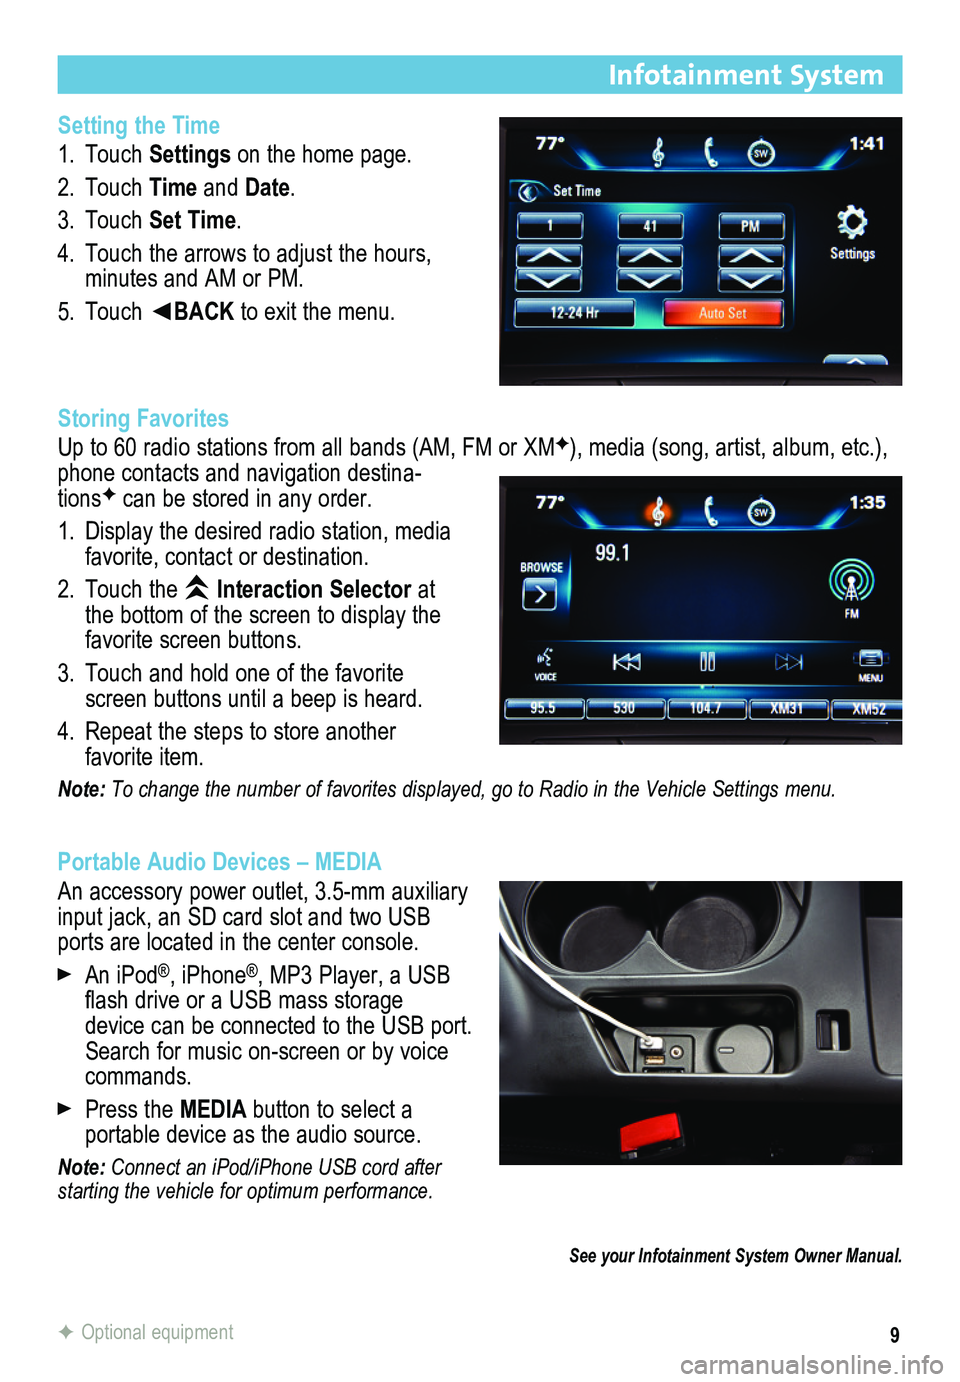 BUICK REGAL 2015  Get To Know Guide 9
Infotainment System
Setting the Time
1. Touch Settings on the home page.
2. Touch Time and Date.
3. Touch Set Time.
4. Touch the arrows to adjust the hours, minutes and AM or PM.
5. Touch ◄BACK to